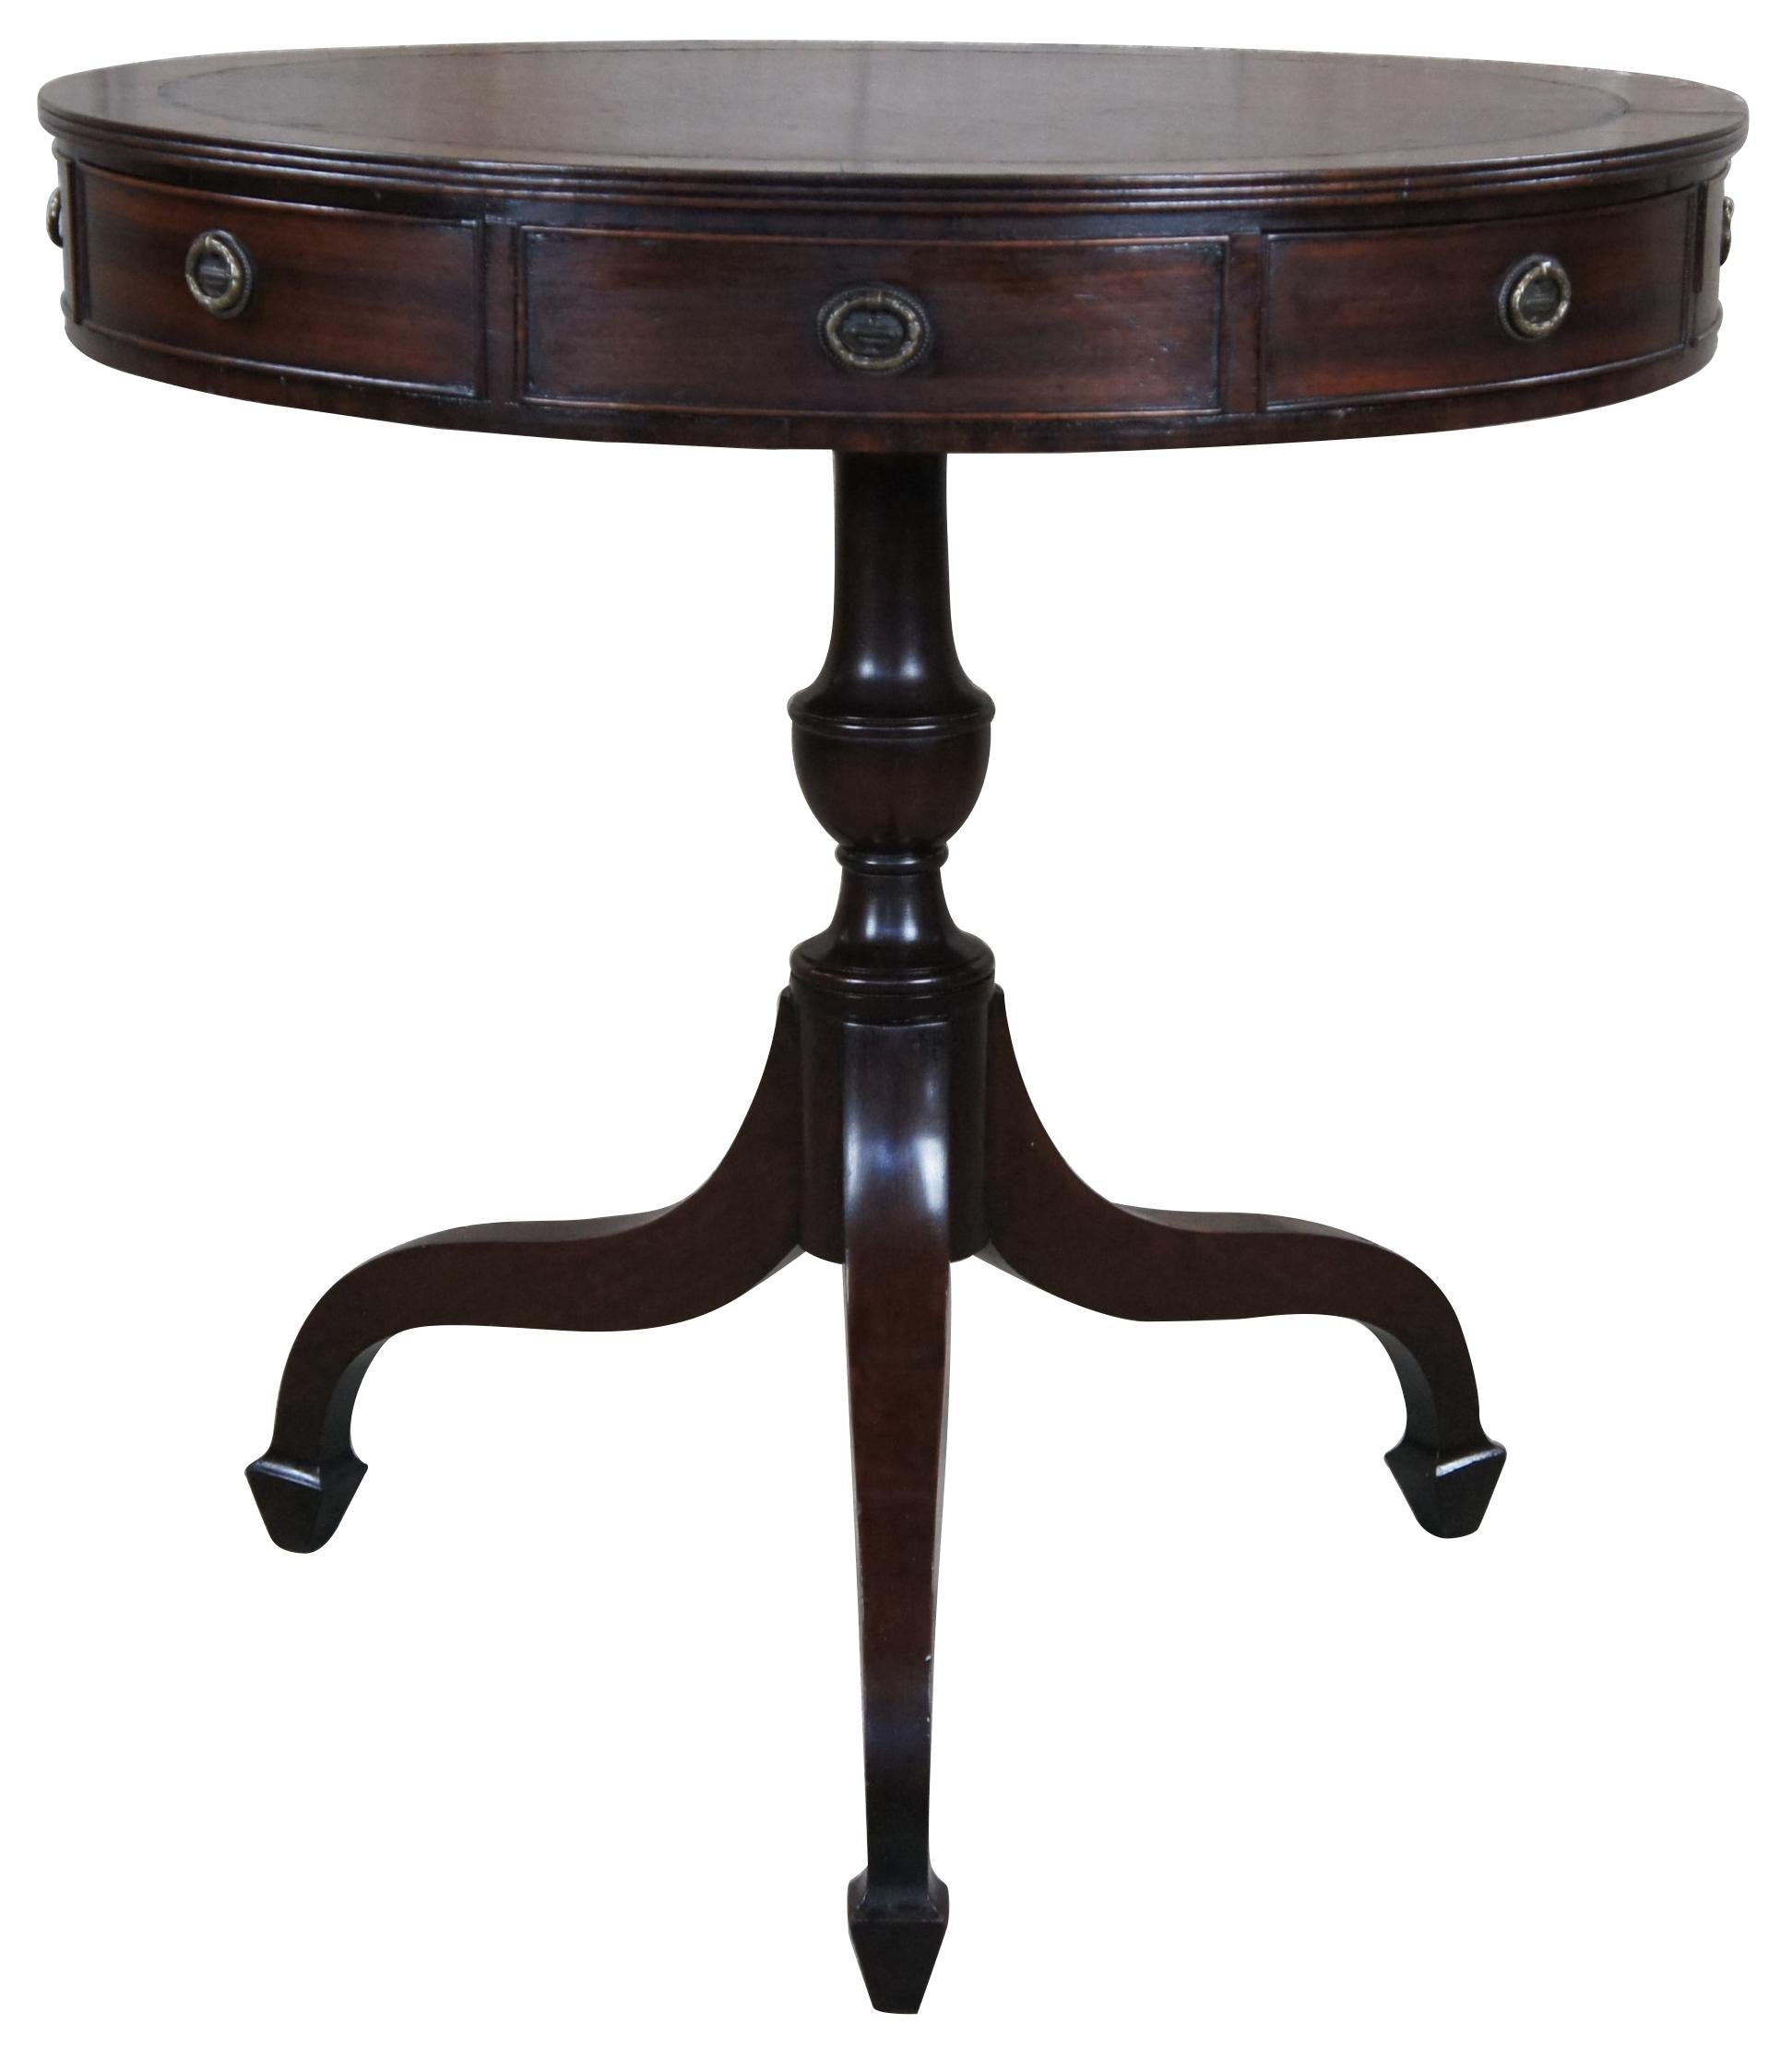 Mid 19th century English Regency rent table. The rent table was an early filing system for land lords. It generally consisted of a drum table with several drawers that were used to keep and collect rent as well as hold papers pertaining to their